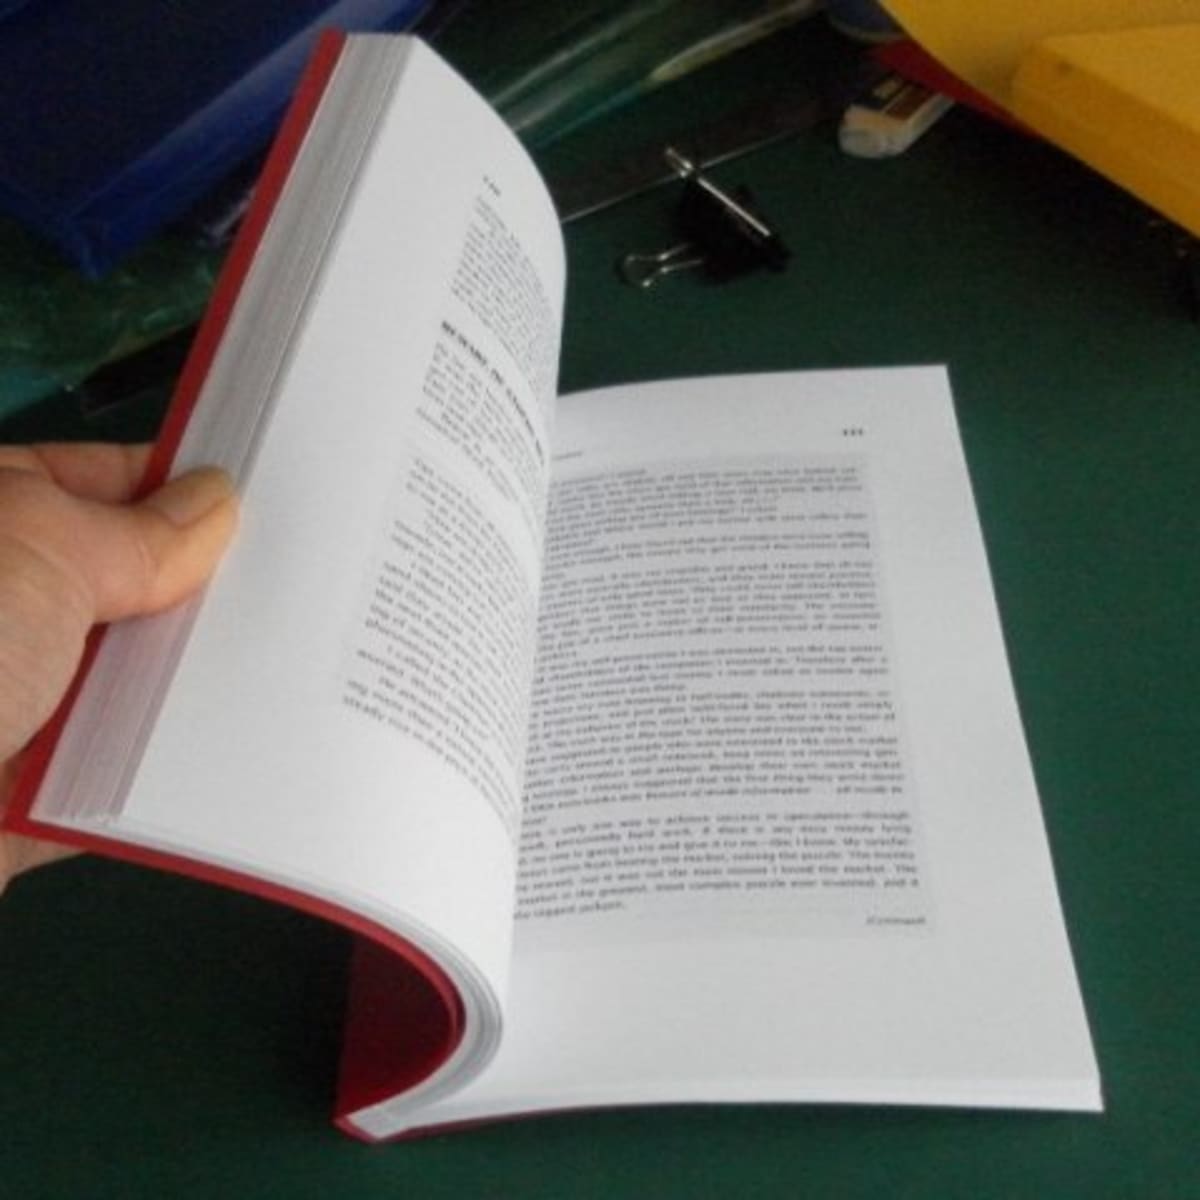 DIY Book Binding - How To Bind Your Own Books and Loose Leaf Pages At Home  - HubPages